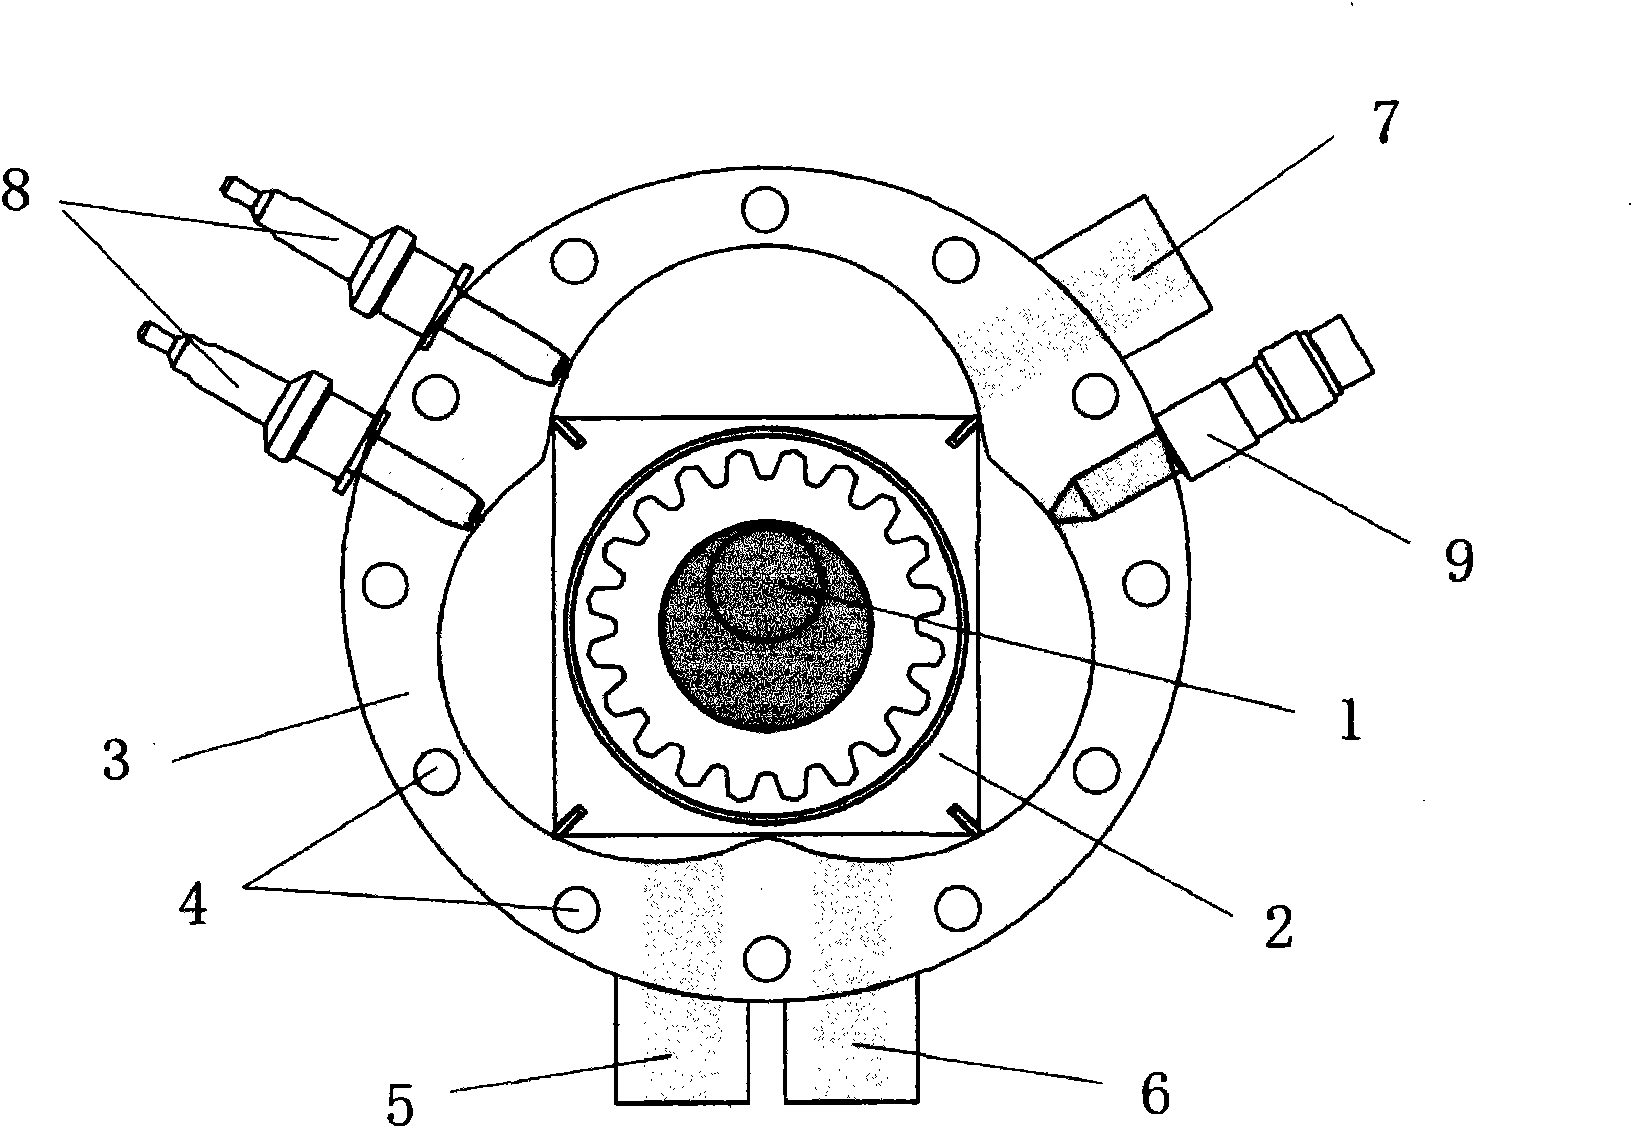 Hybrid-power engine with square rotor